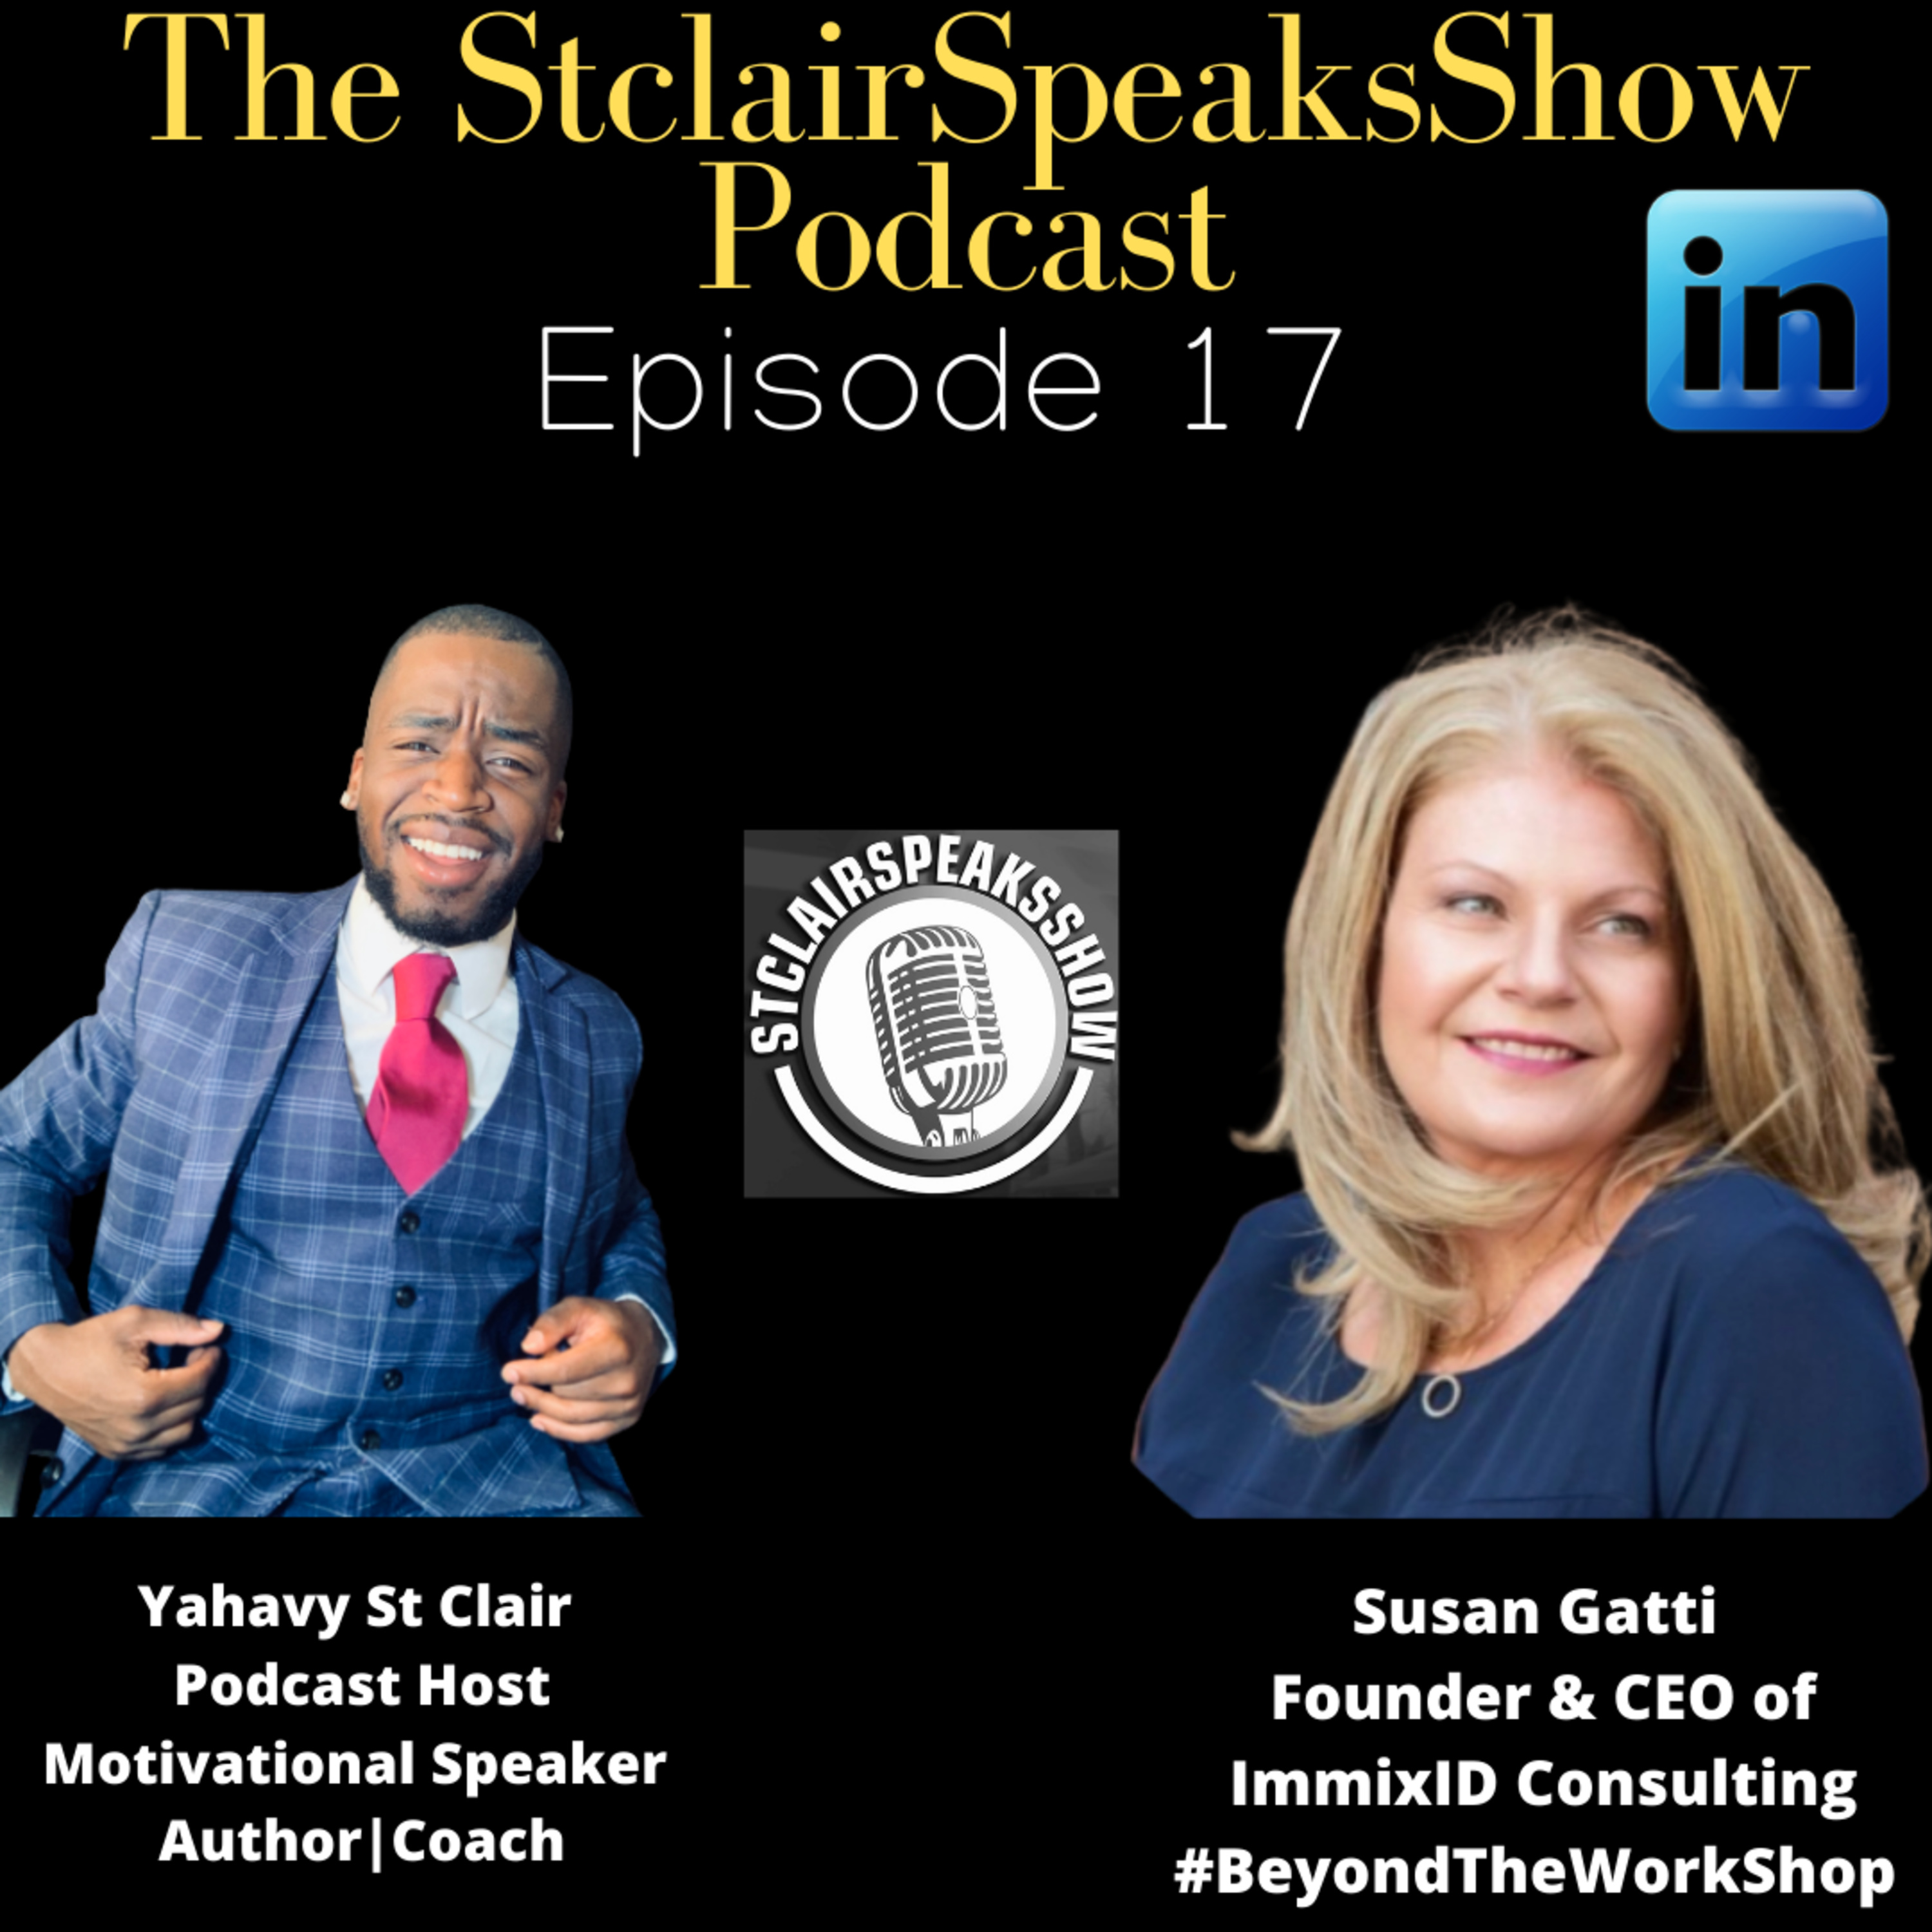 The StclairSpeaksShow Podcast Featuring Susan Gatti CEO & Founder of ImmixID Consulting Image